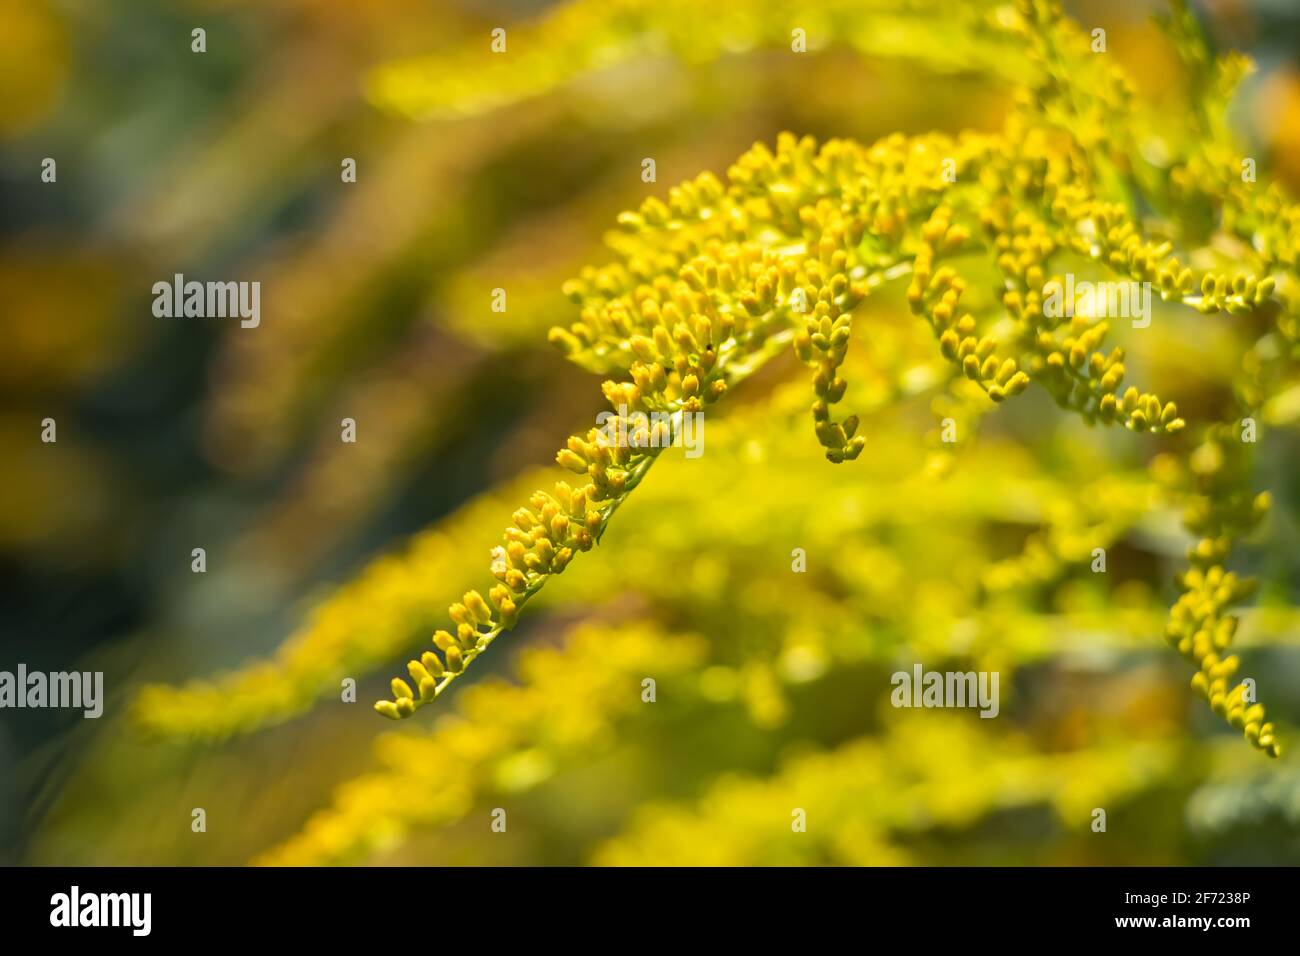 Goldenrod flower or Solidago Canadensis, honey plant, sunset, close-up, selective focus. Stock Photo